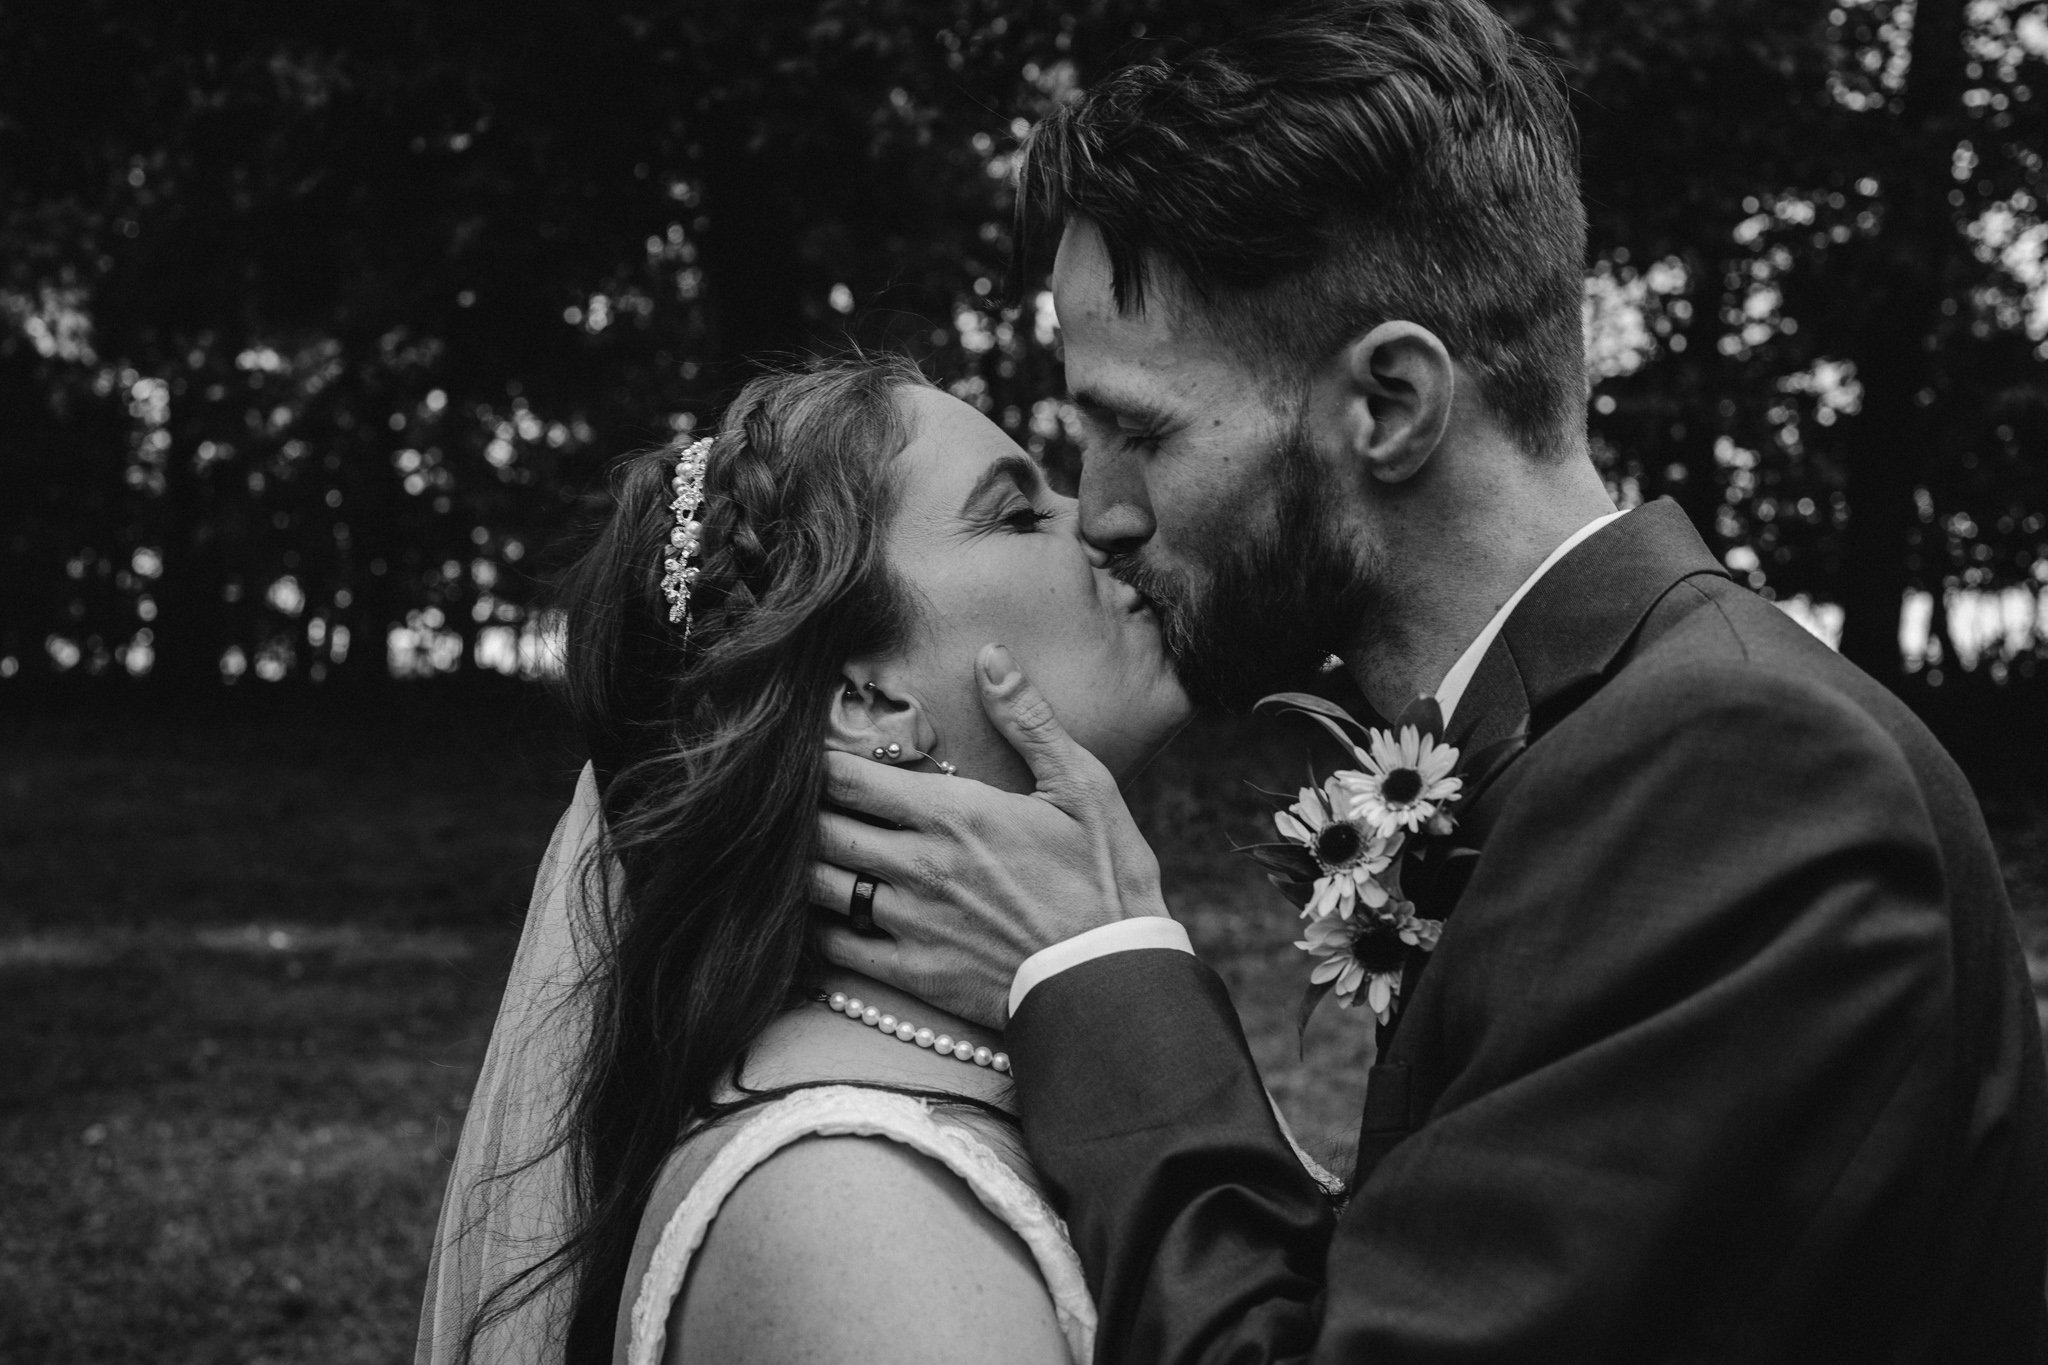 A bride and groom kiss, in black and white.